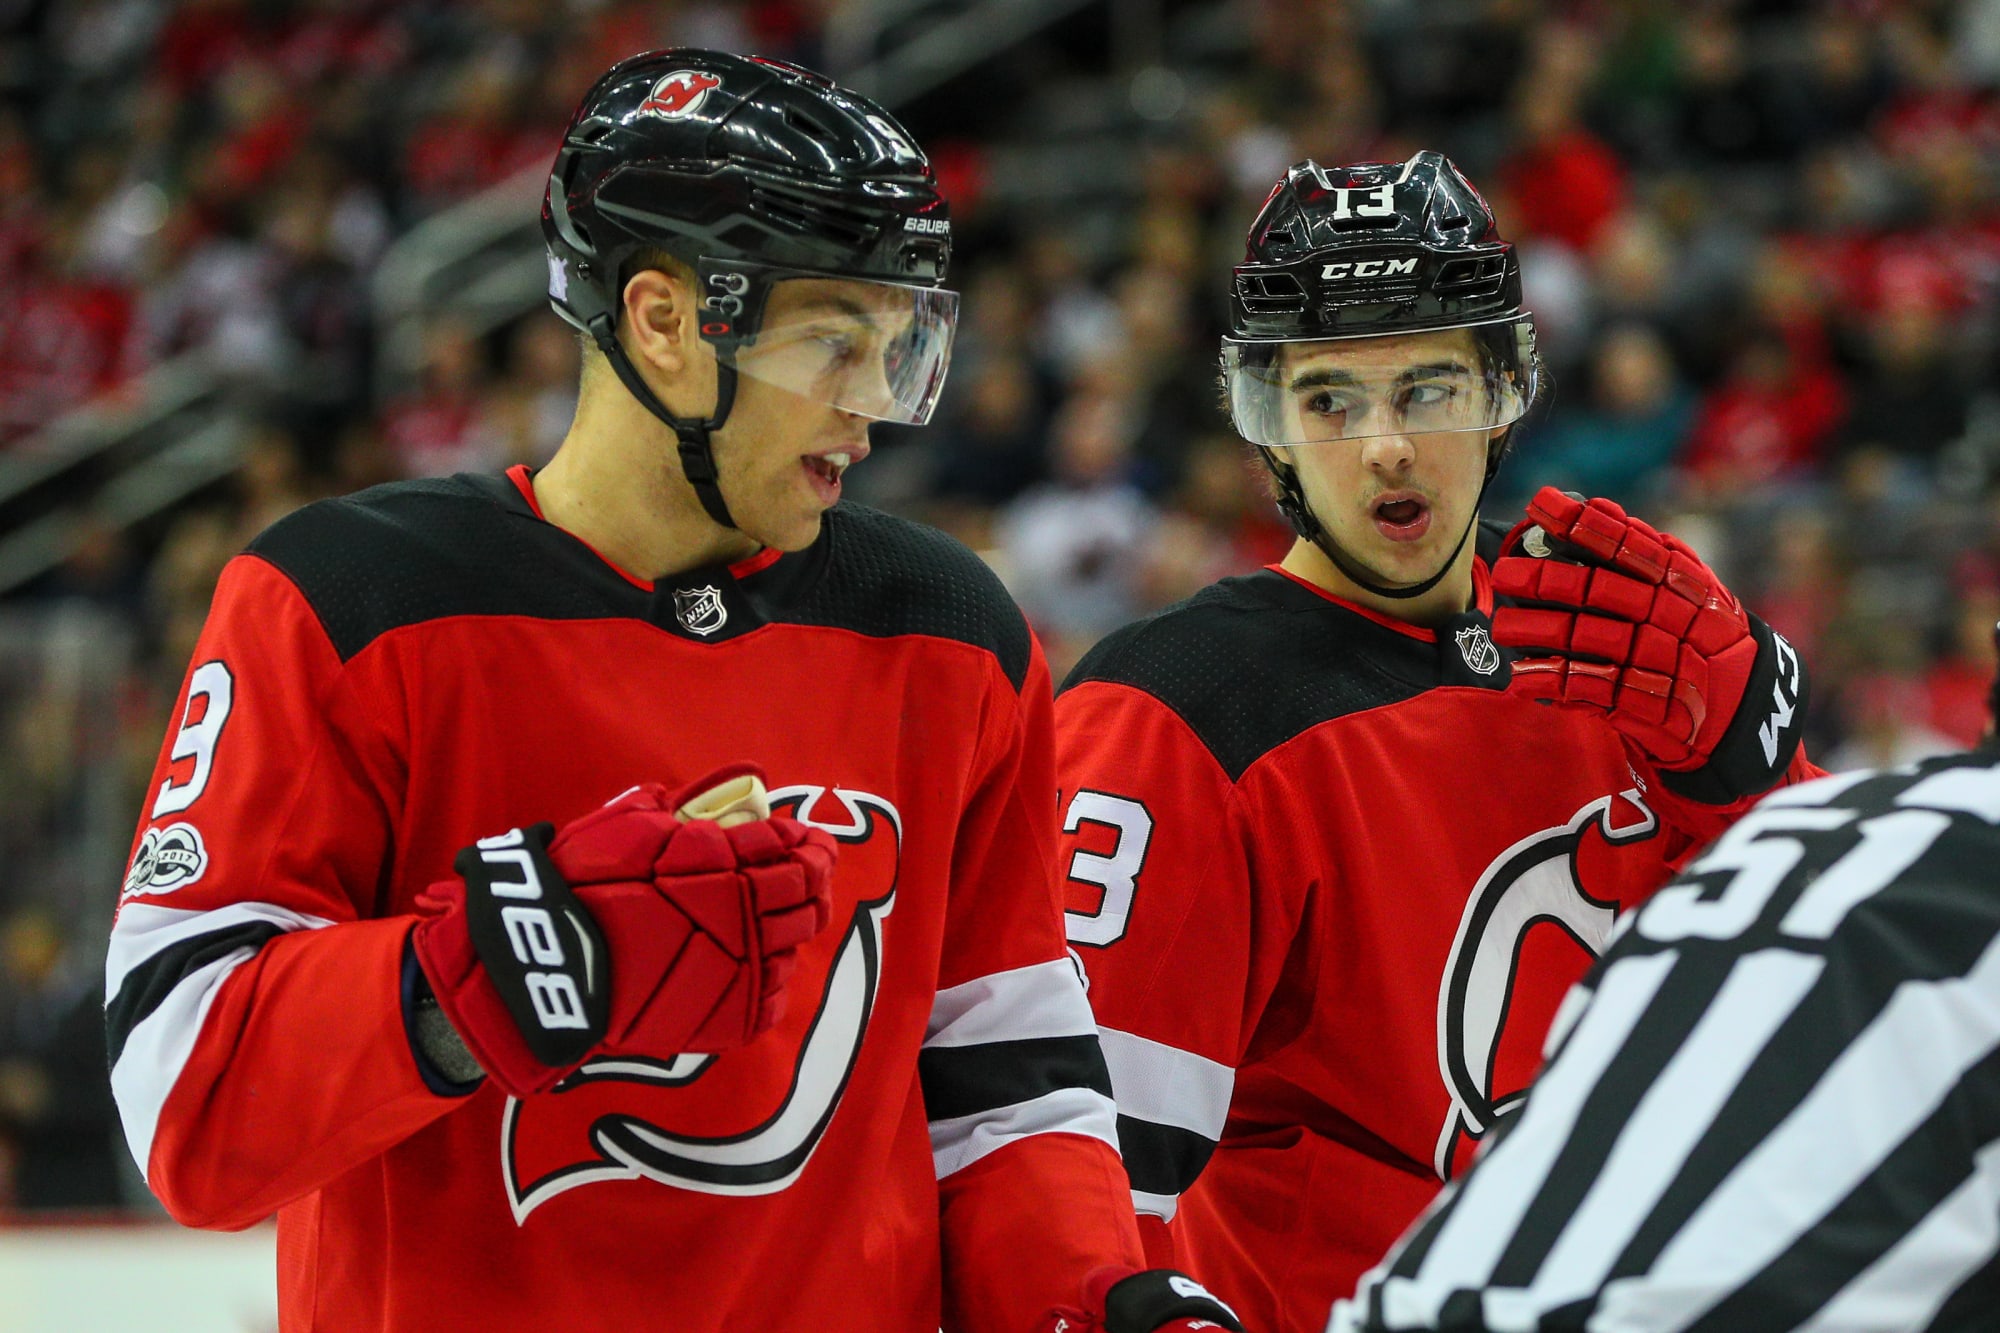 New Jersey Devils: Nico Hischier And Jack Hughes Lead Again